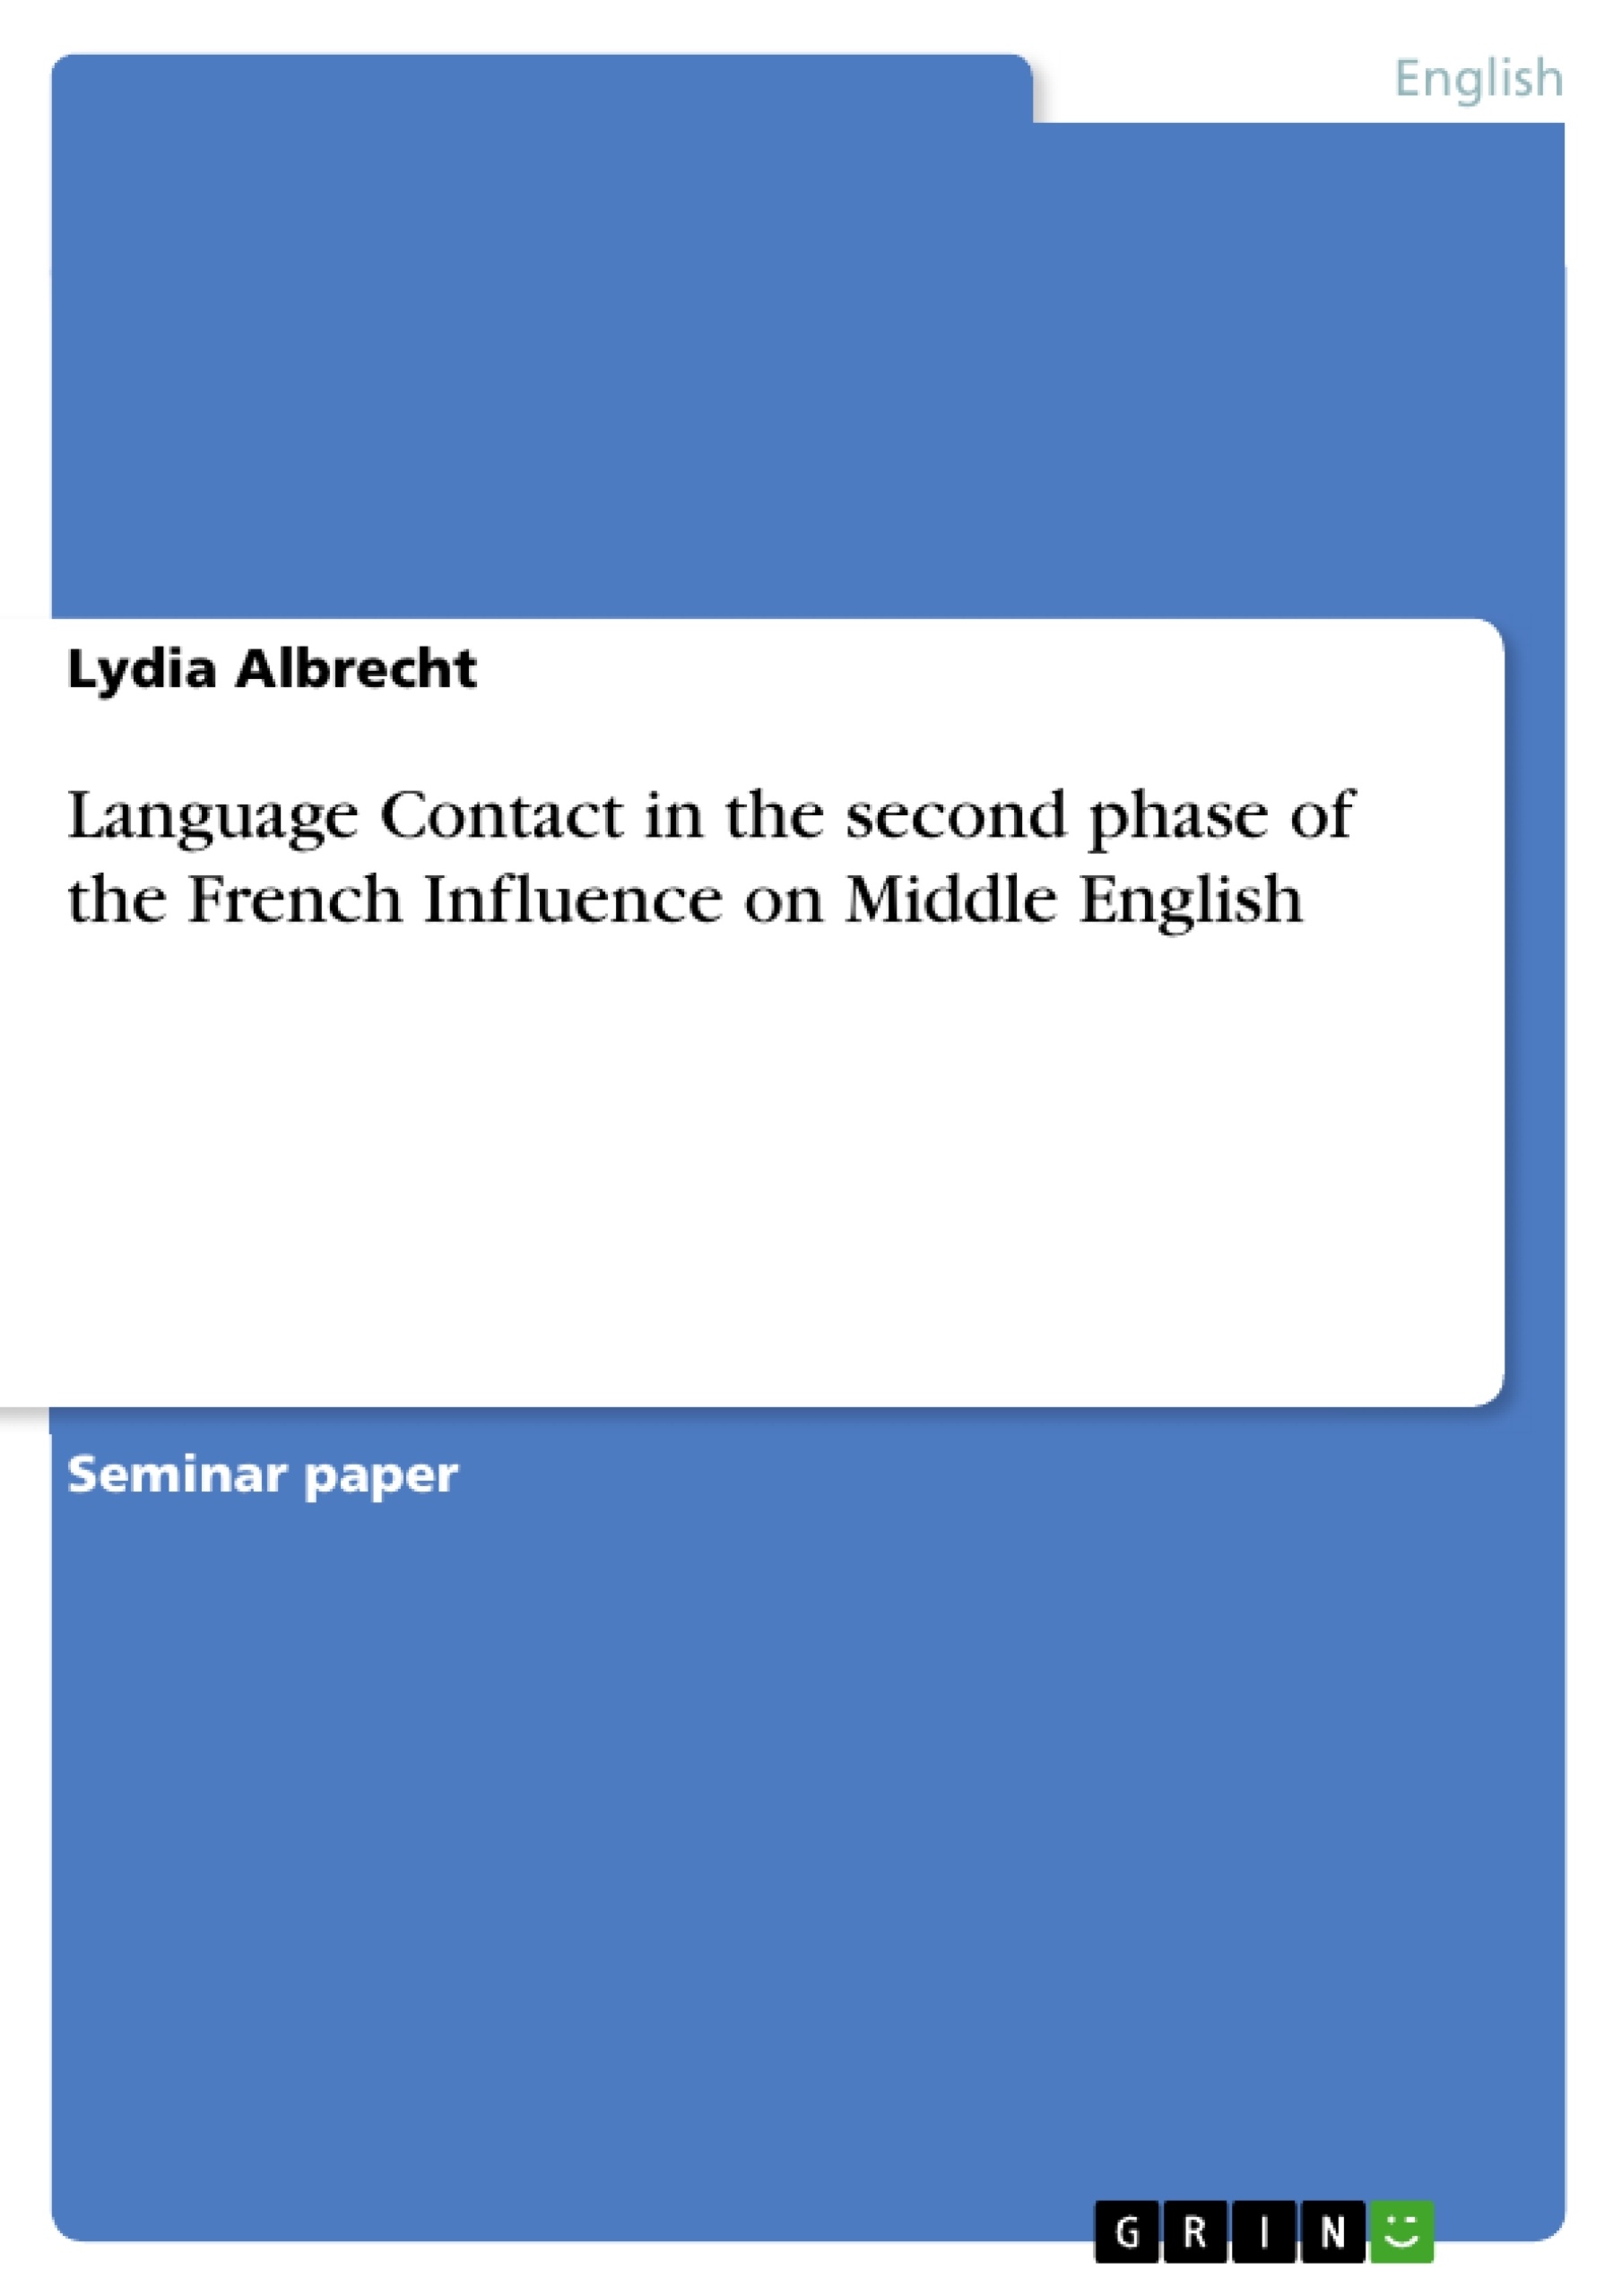 Title: Language Contact in the second phase of the French Influence on Middle English